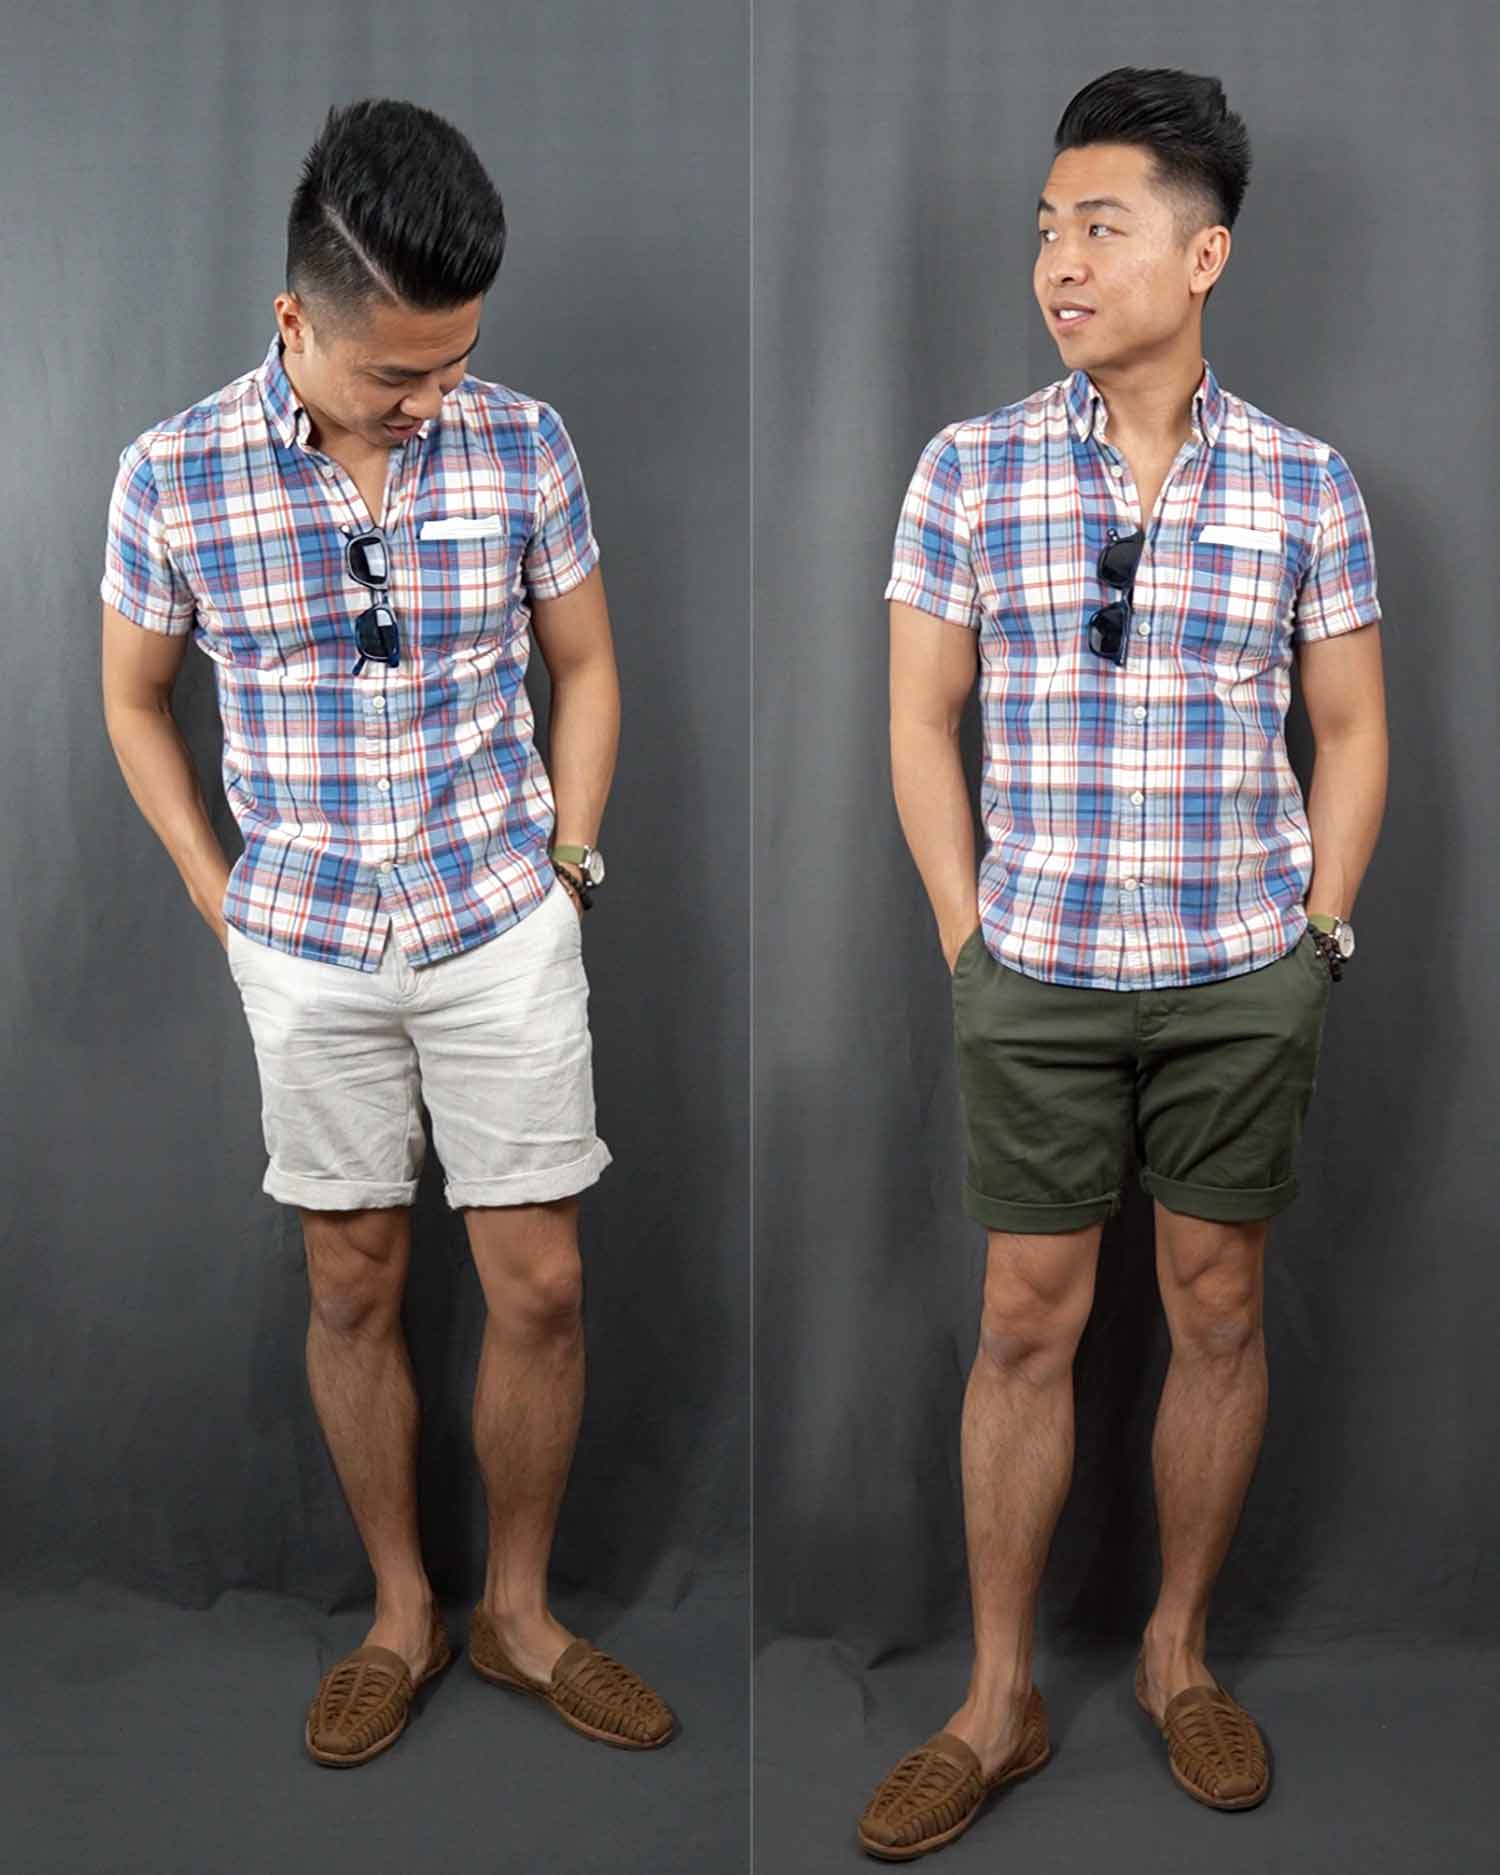 Madras Short Sleeve Button Down Shirt Outfit